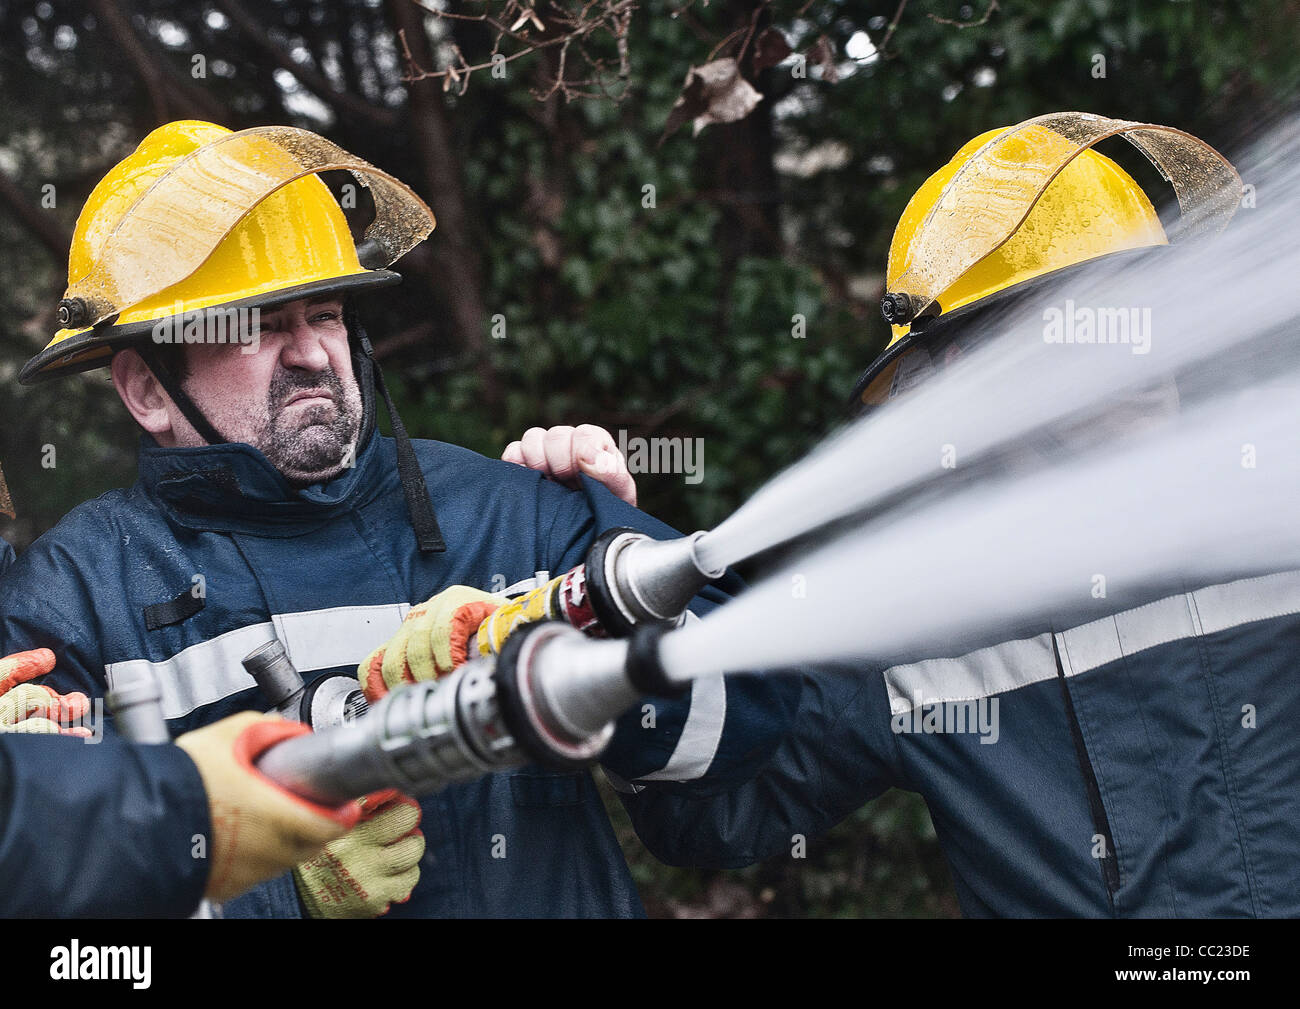 A fire fighter uses a water hose to douse a fire Stock Photo - Alamy